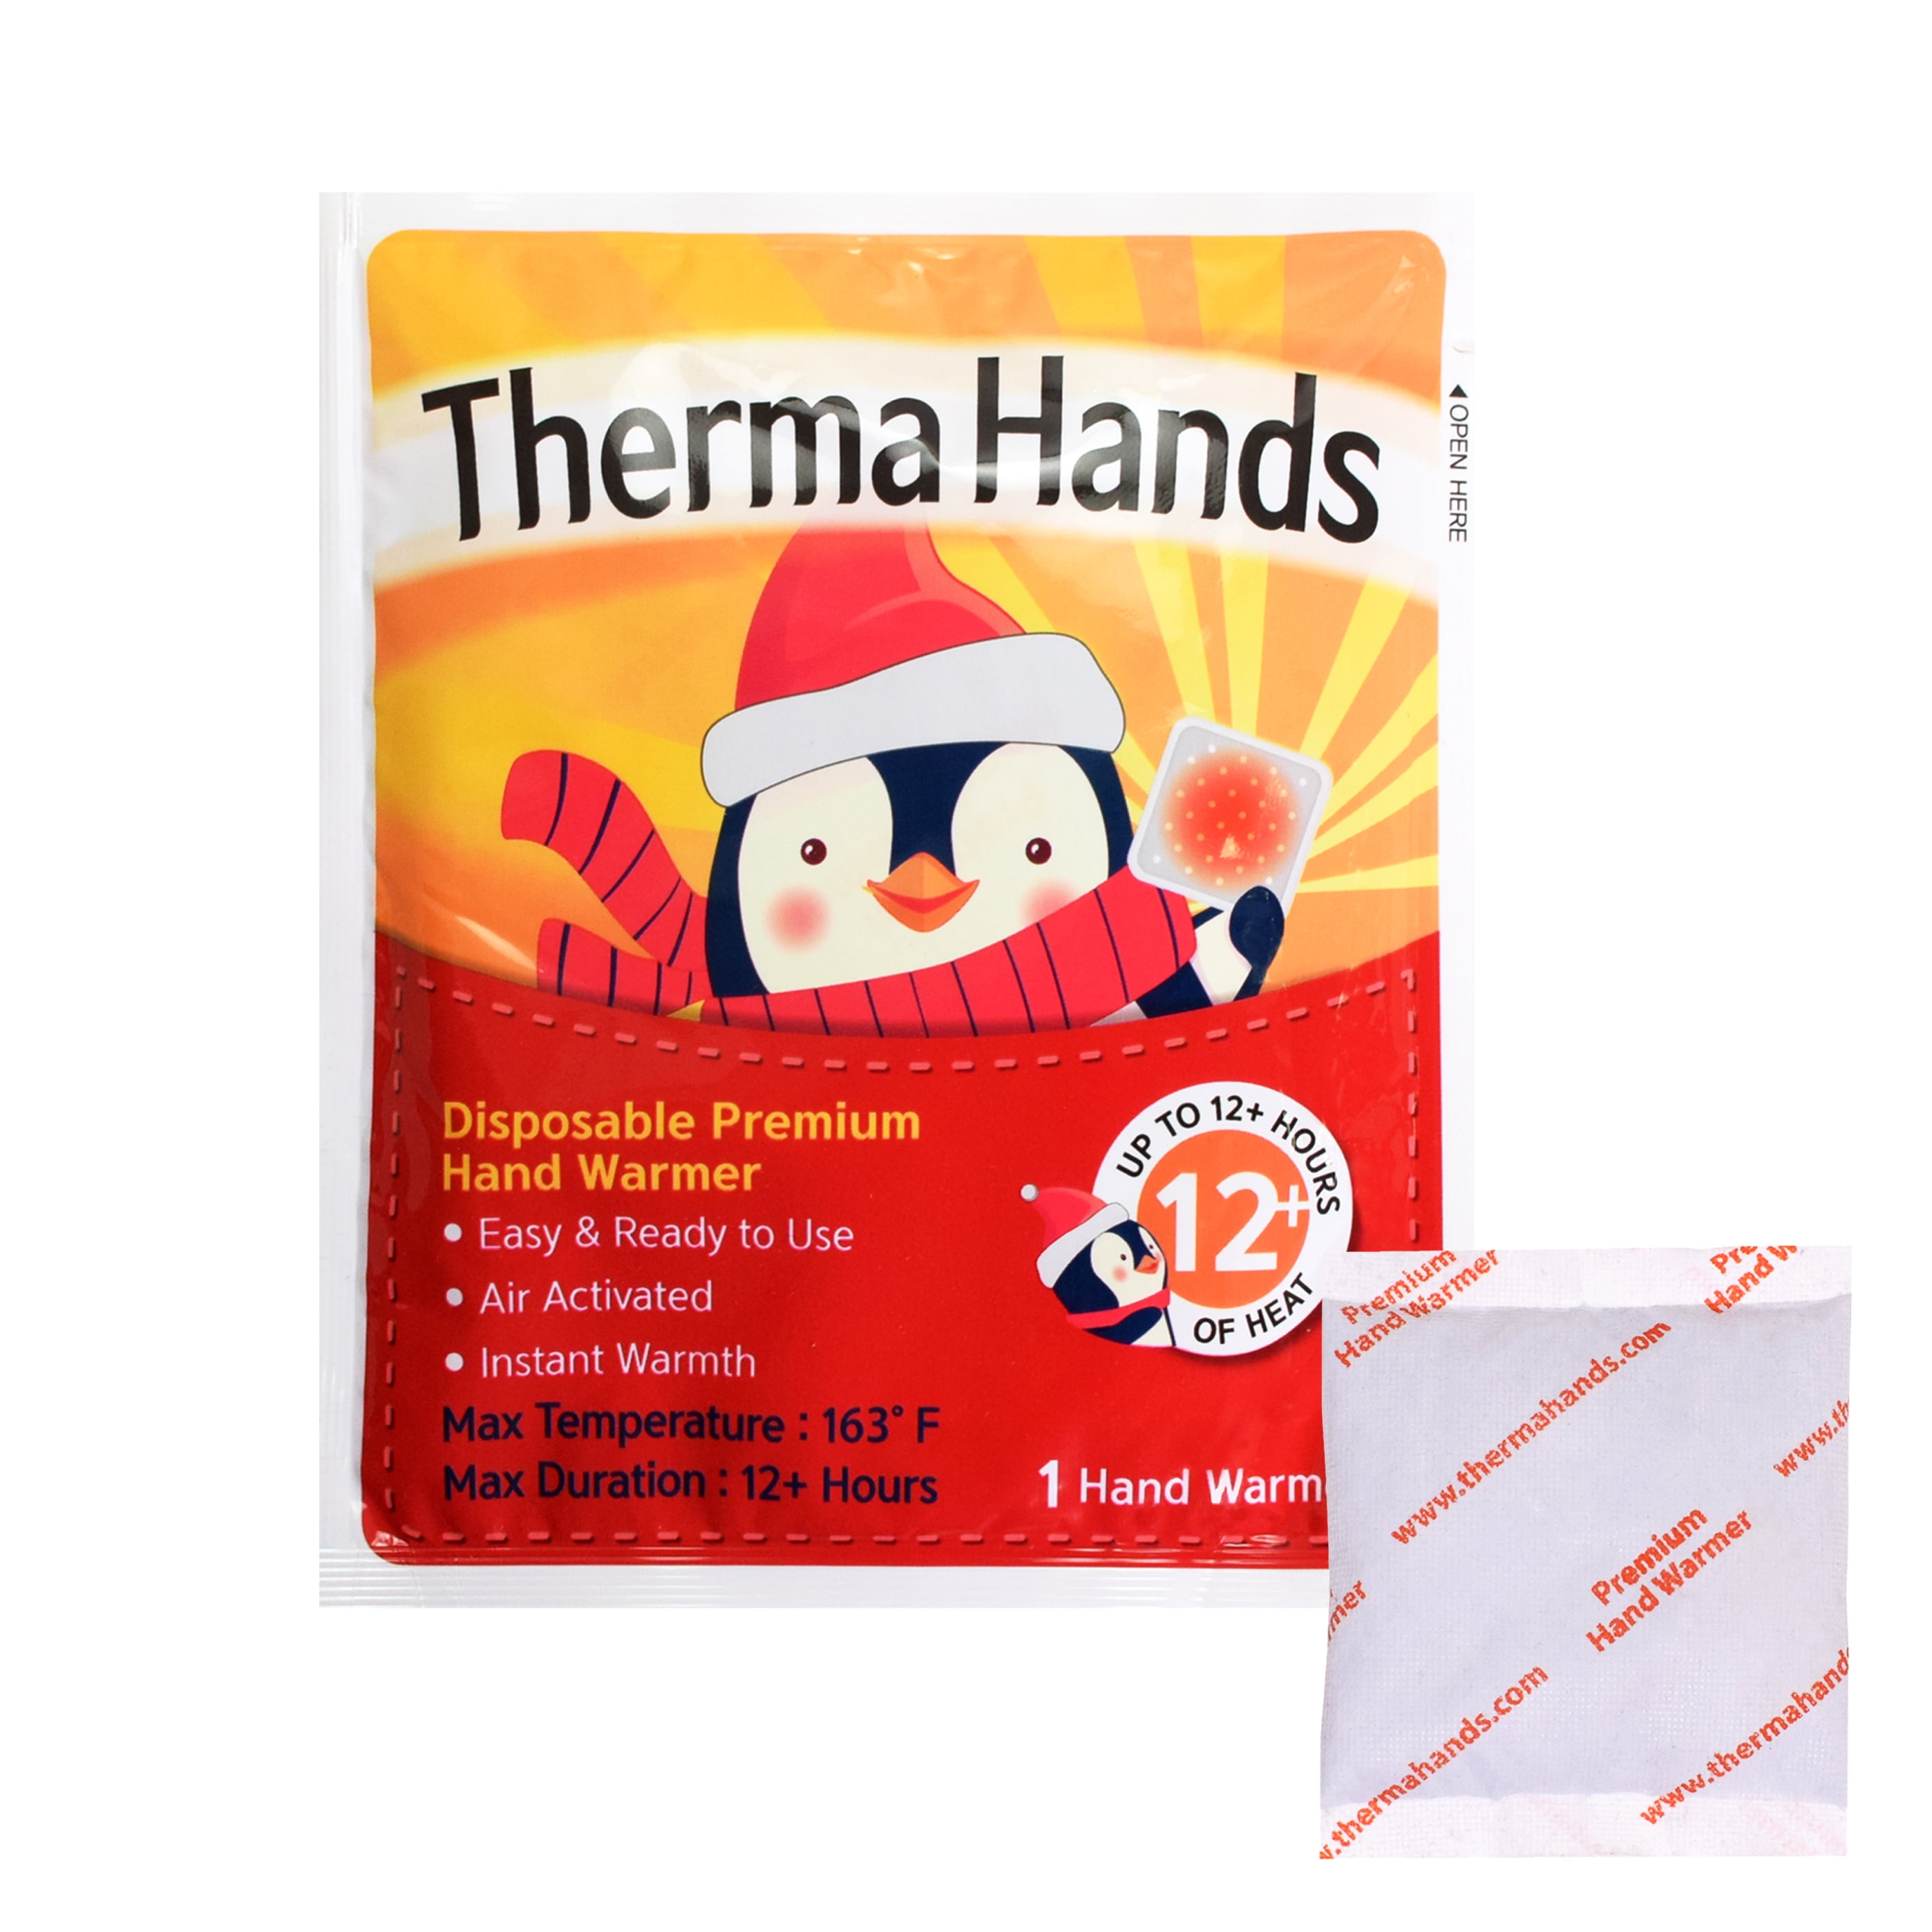 Convenient 15 Packs Odorless, Size: 3.5 inch x 4 inch, Duration: 12 Hours, Max Temp: 163 F Natural Safe - Premium Quality Air-Activated ThermaHands Hand Warmers